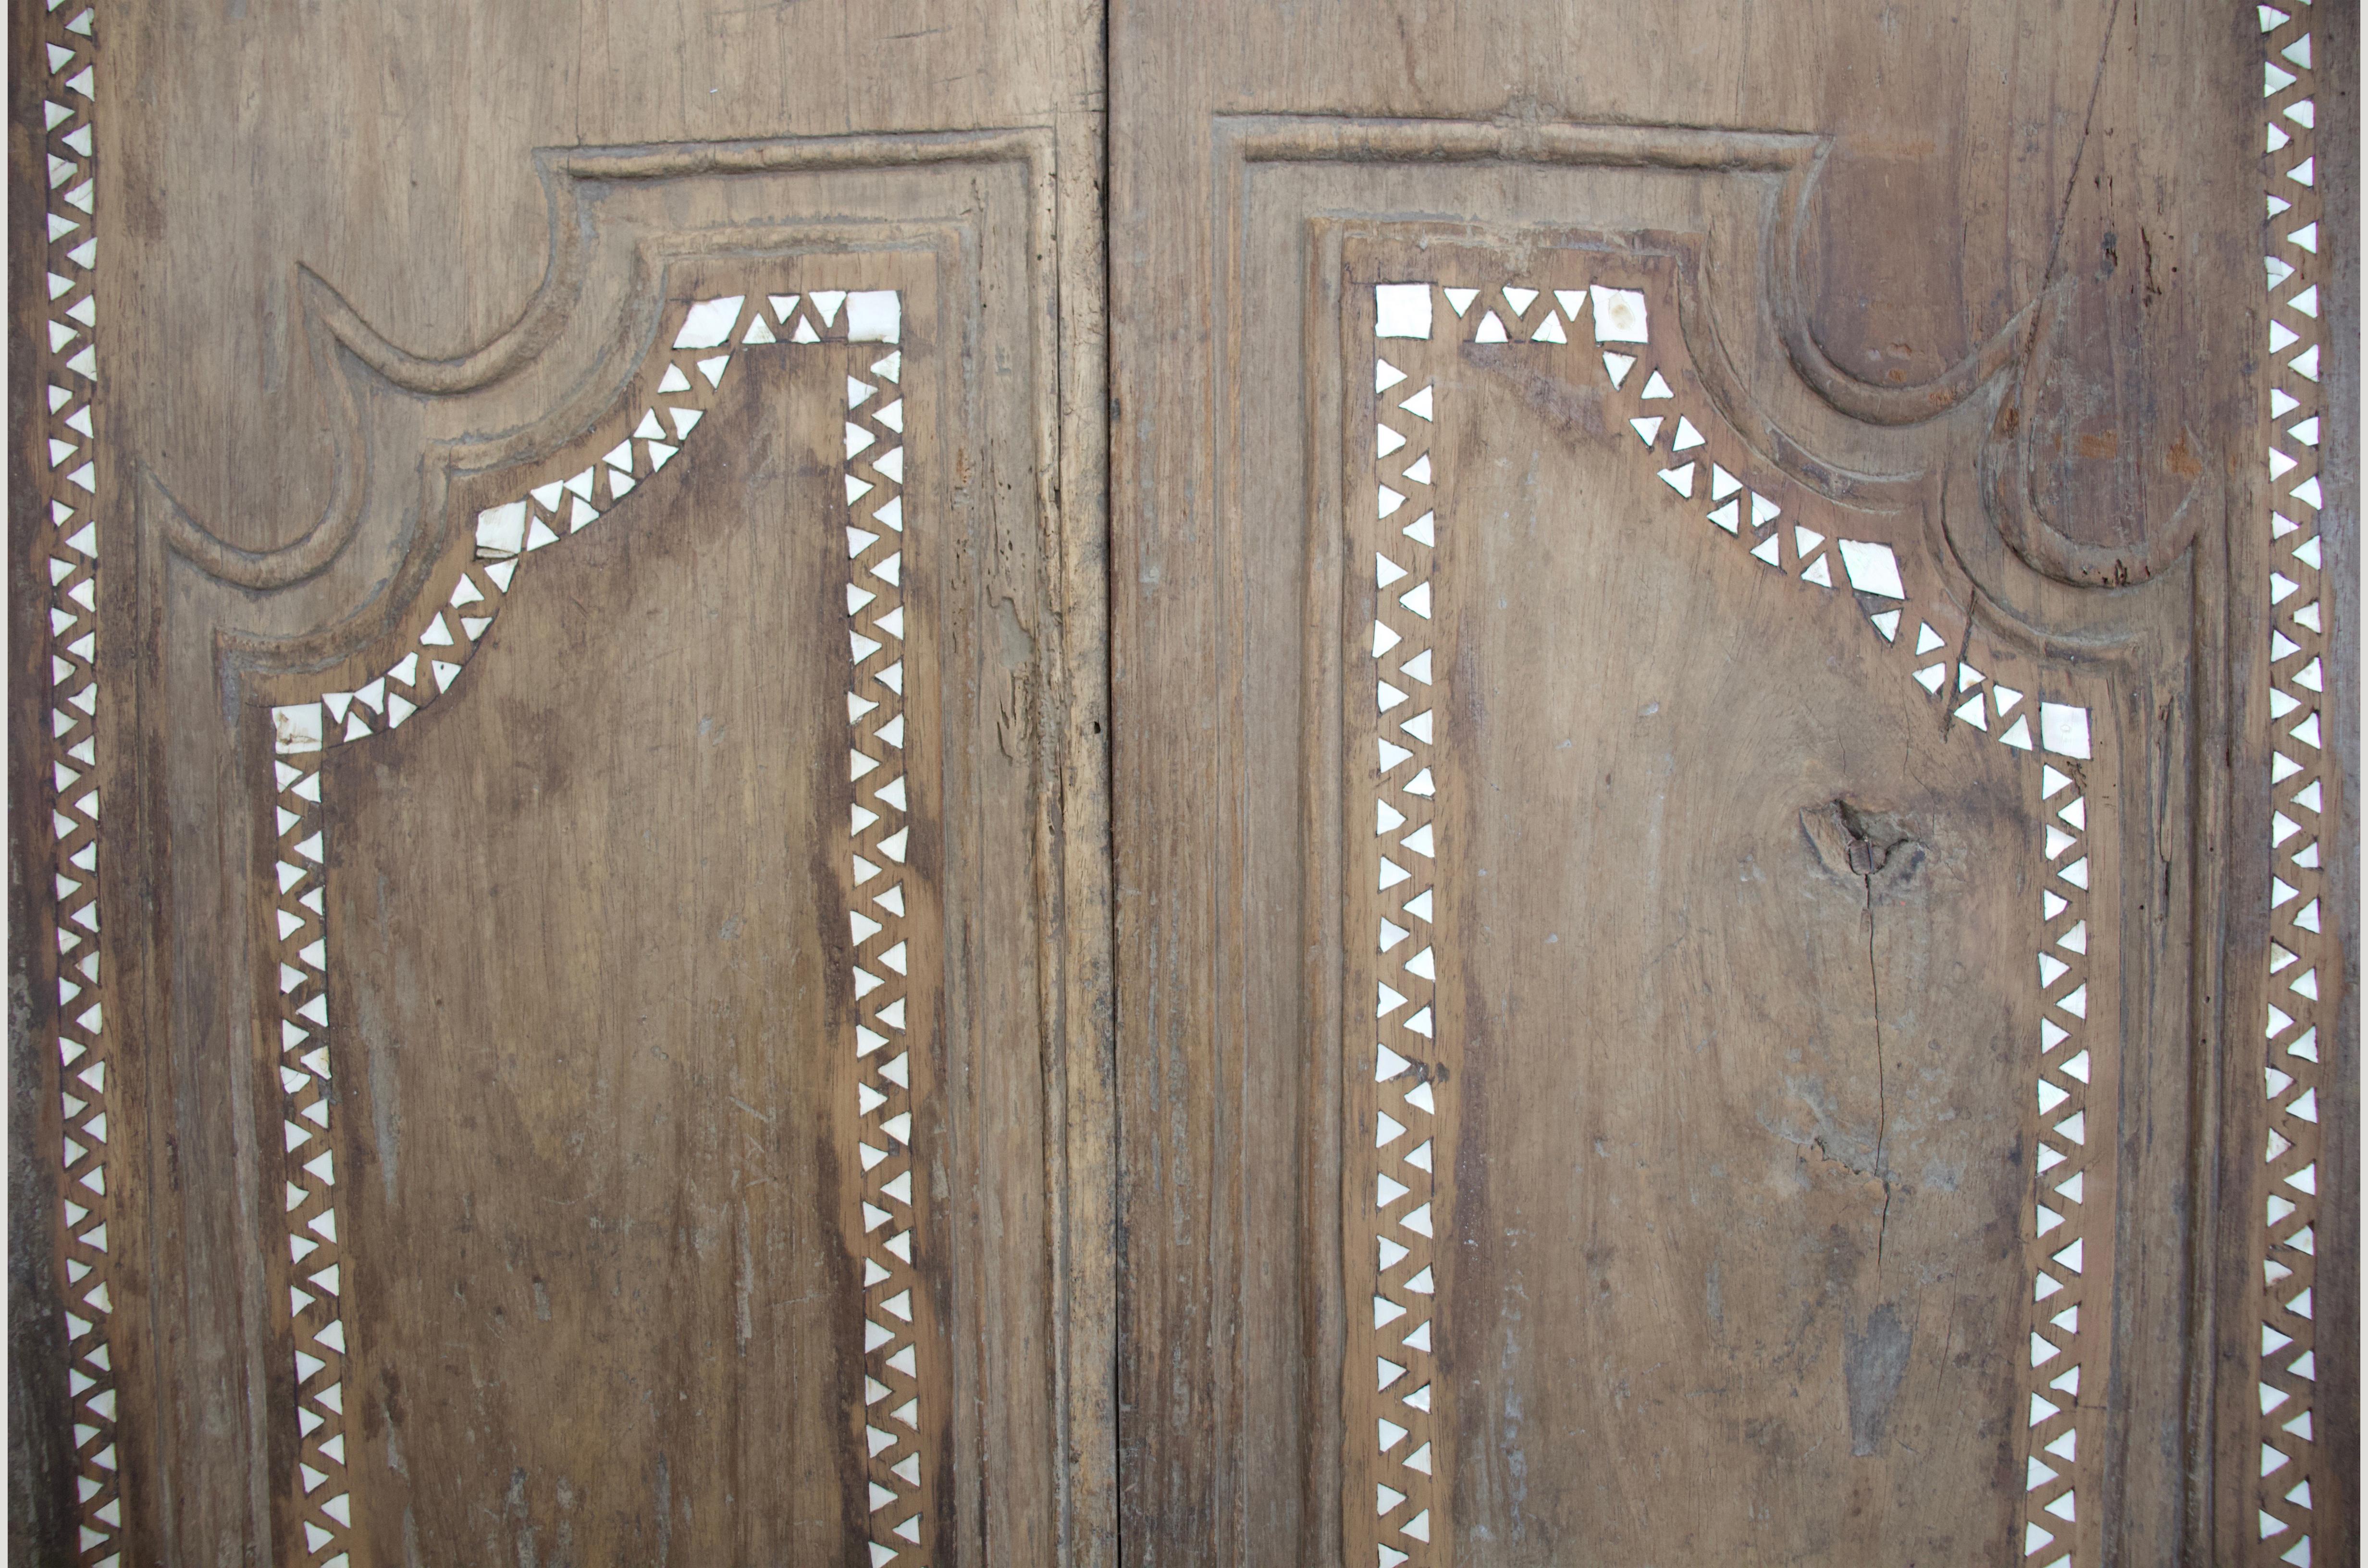 Antique temple doors in teak wood. We added the shell inlay by hand. Great as a headboard or coffee table. We currently have a large collection of temple doors available. All unique with added shell inlay, setting these apart from standard antique